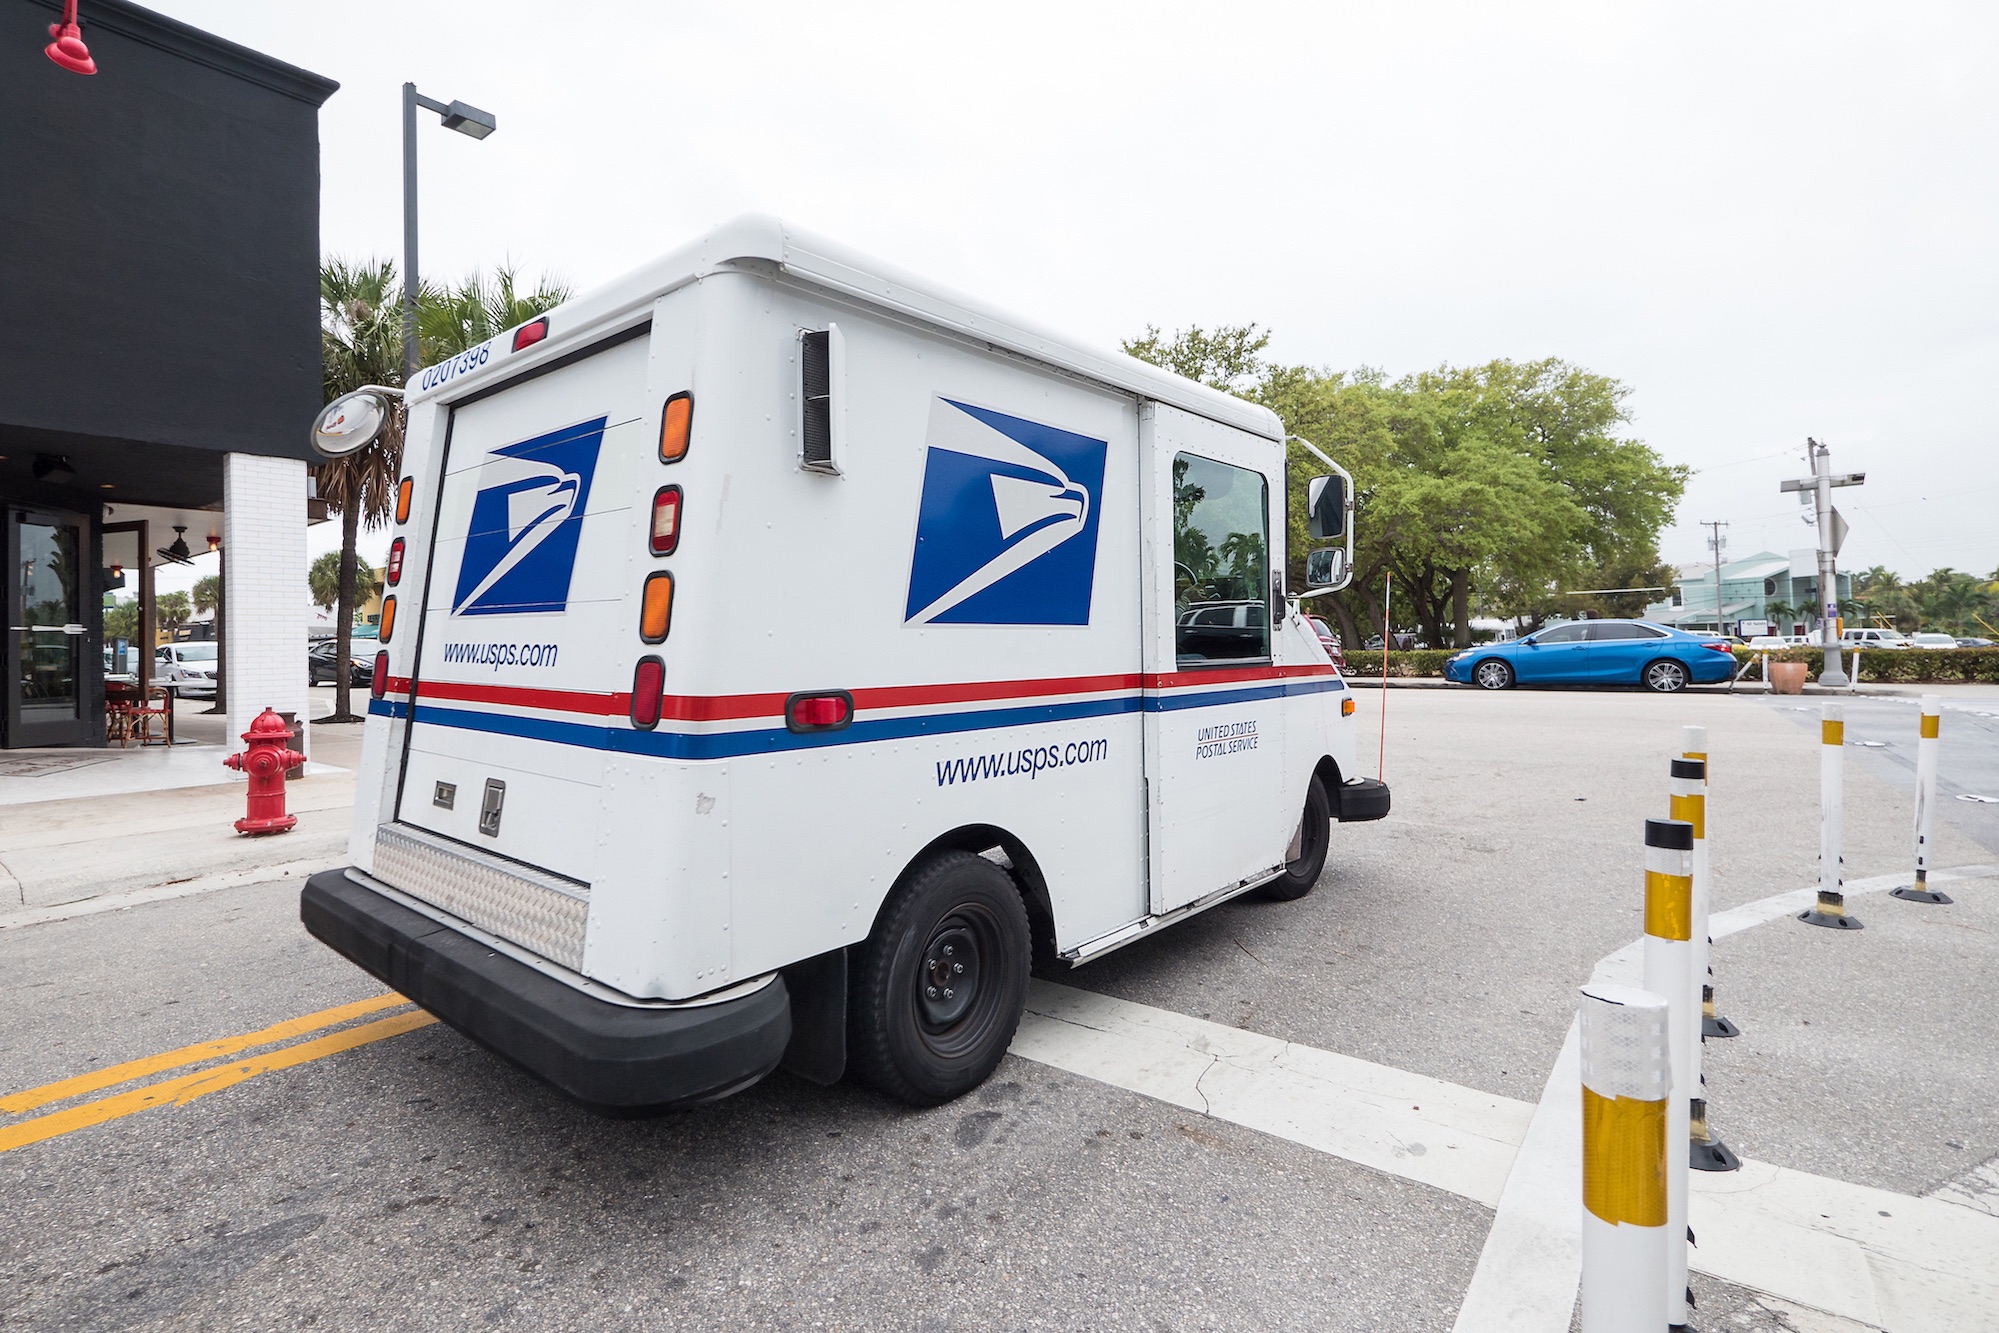 Podcast: Nathan Diament on Whether the Post Office Can Force Employees to Work on the Sabbath